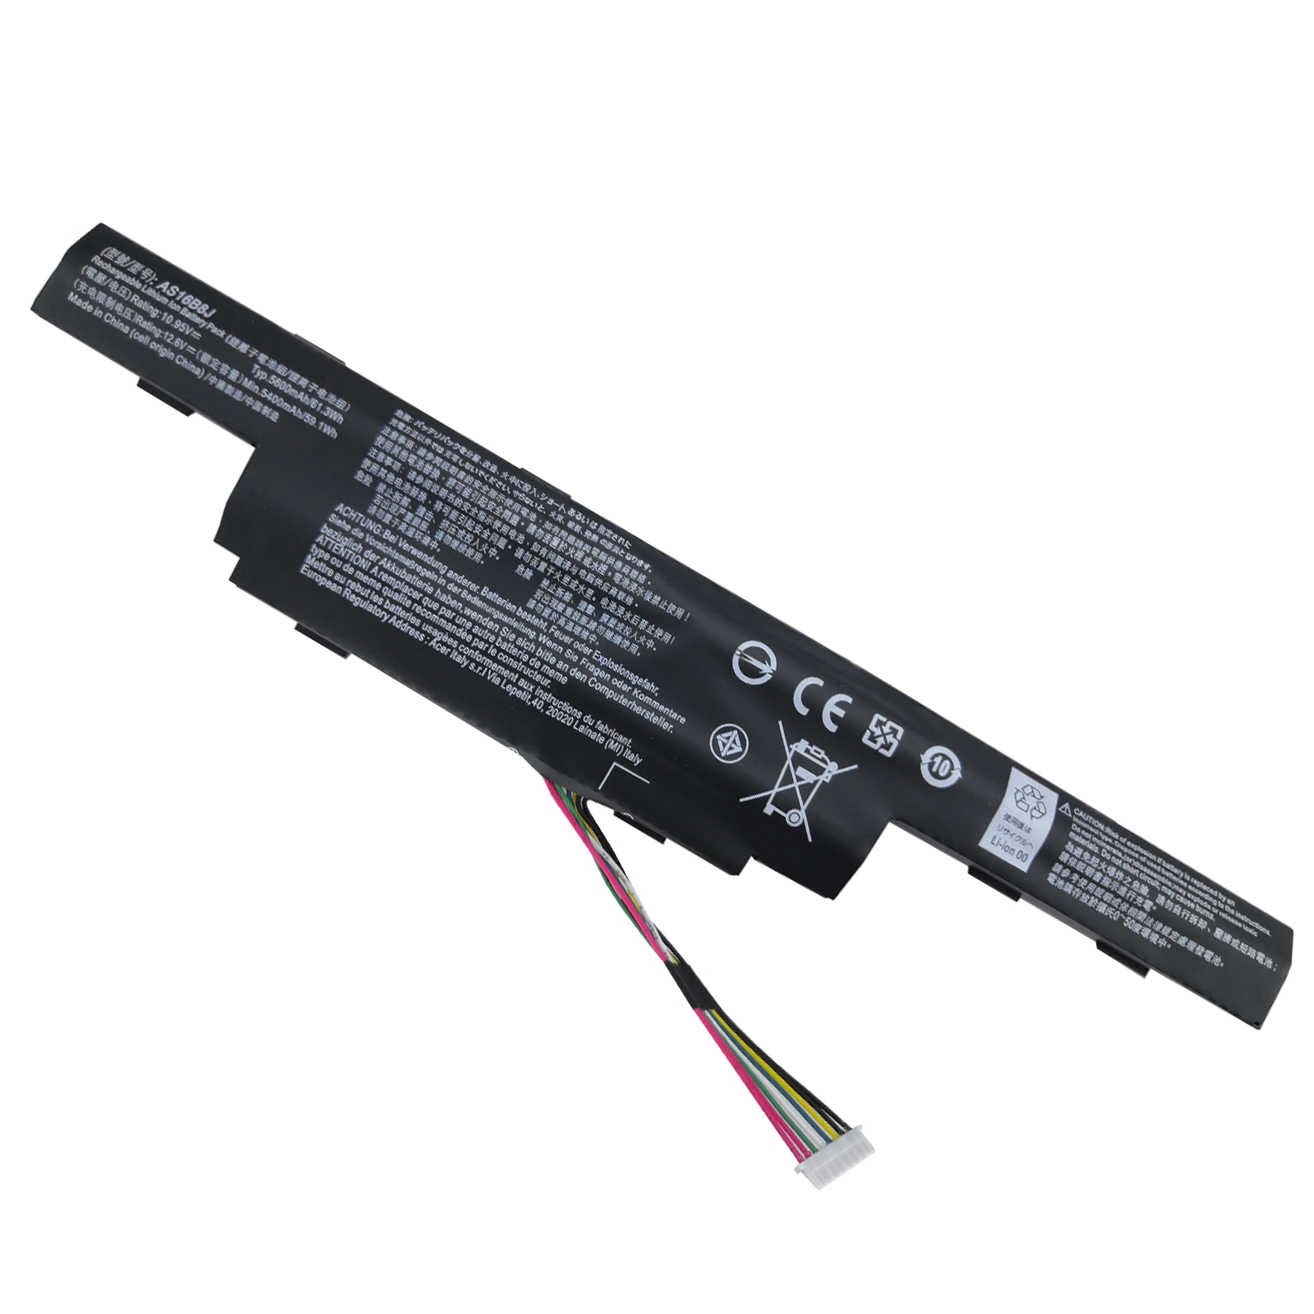 3ICR19/66-2, AS16B5J replacement Laptop Battery for Acer Acpire E15 E5-575G-5341, Aspire 575G-53VG, 5600mah / 61.3wh, 10.95v